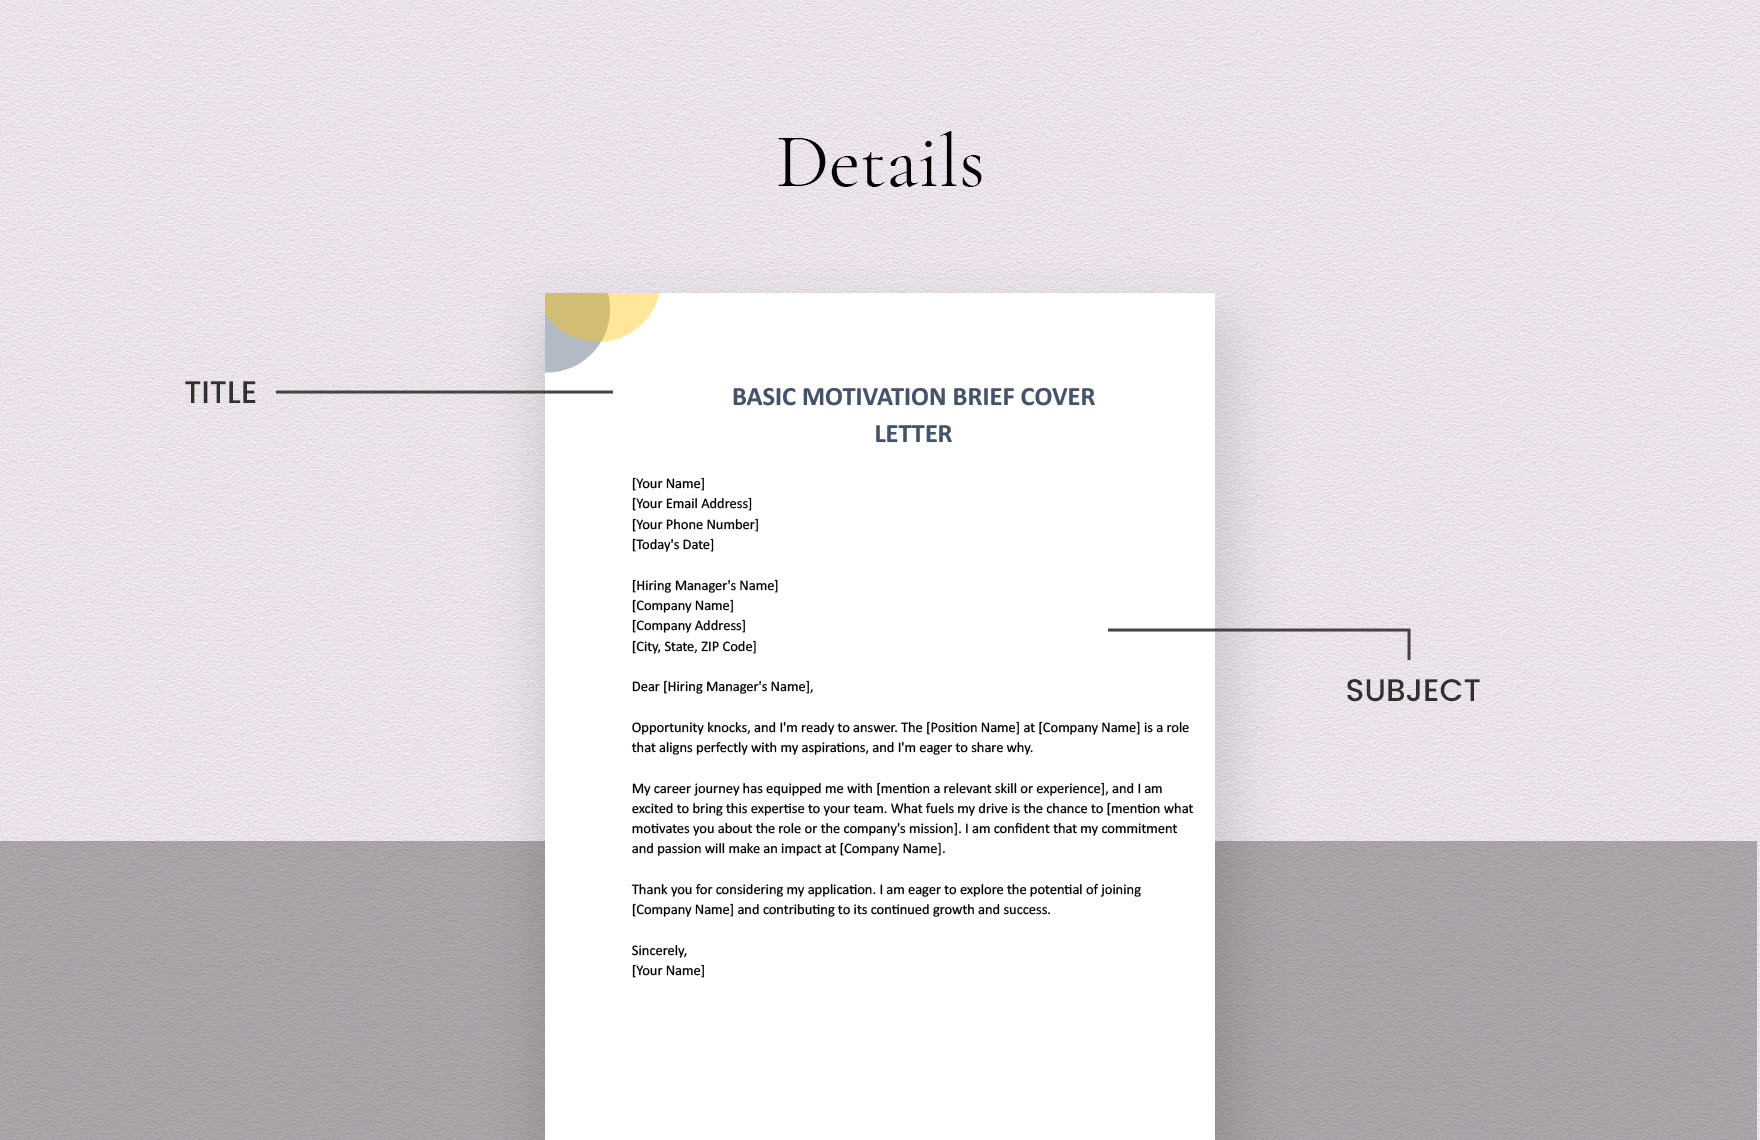 Basic Motivation Brief Cover Letter Template